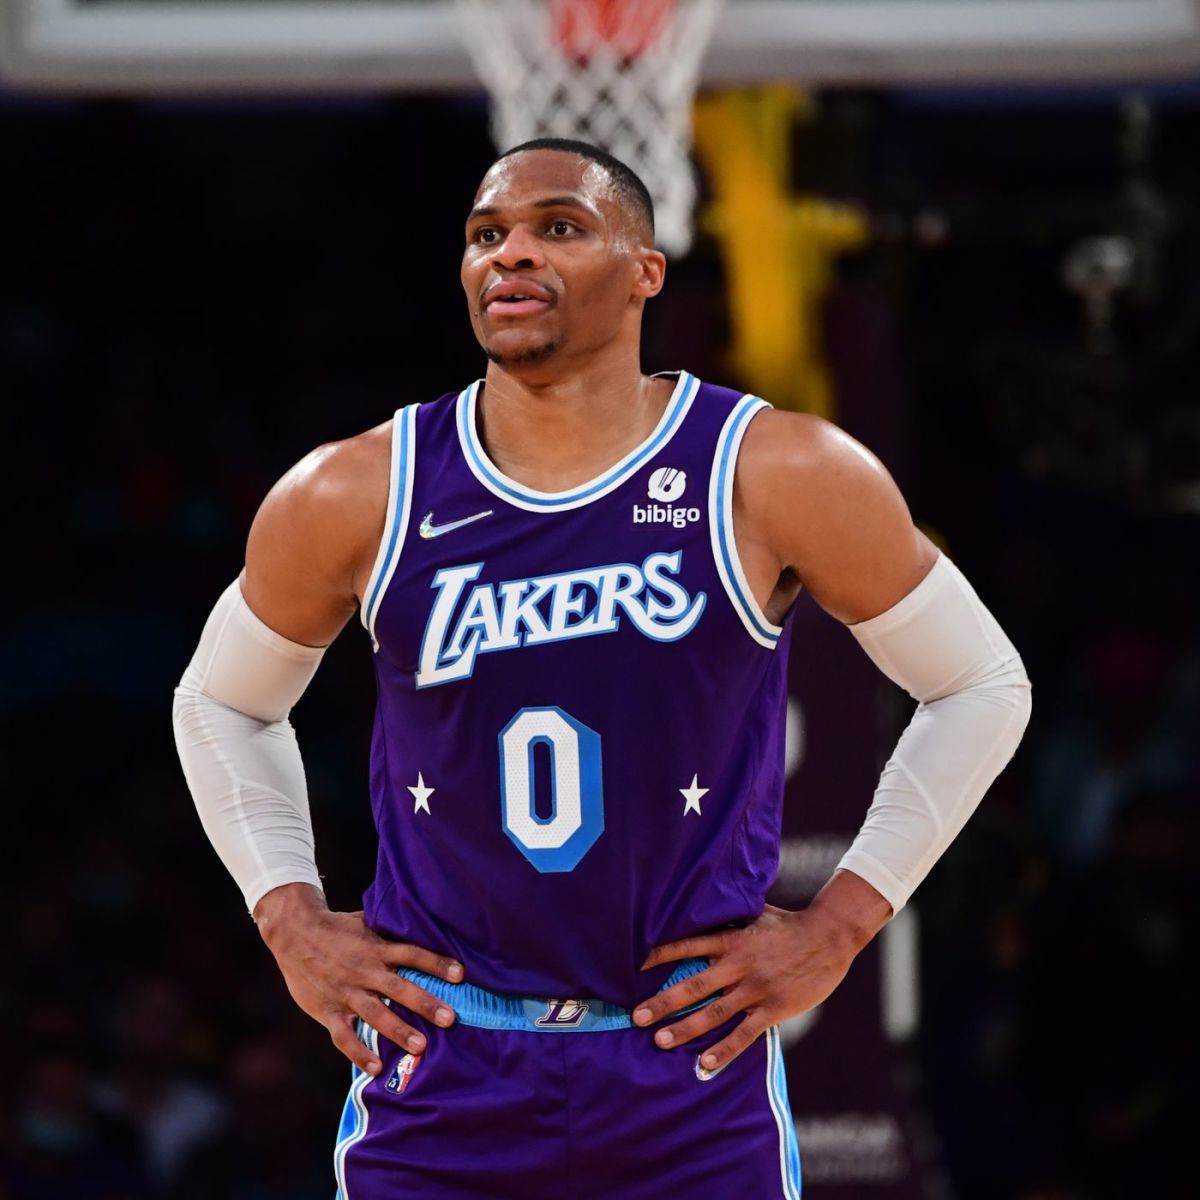 Zach Lowe Claims Russell Westbrook Is Not A Superstar Anymore: "It's Time To Call A Spade A Spade, He's A Defensive Disaster"